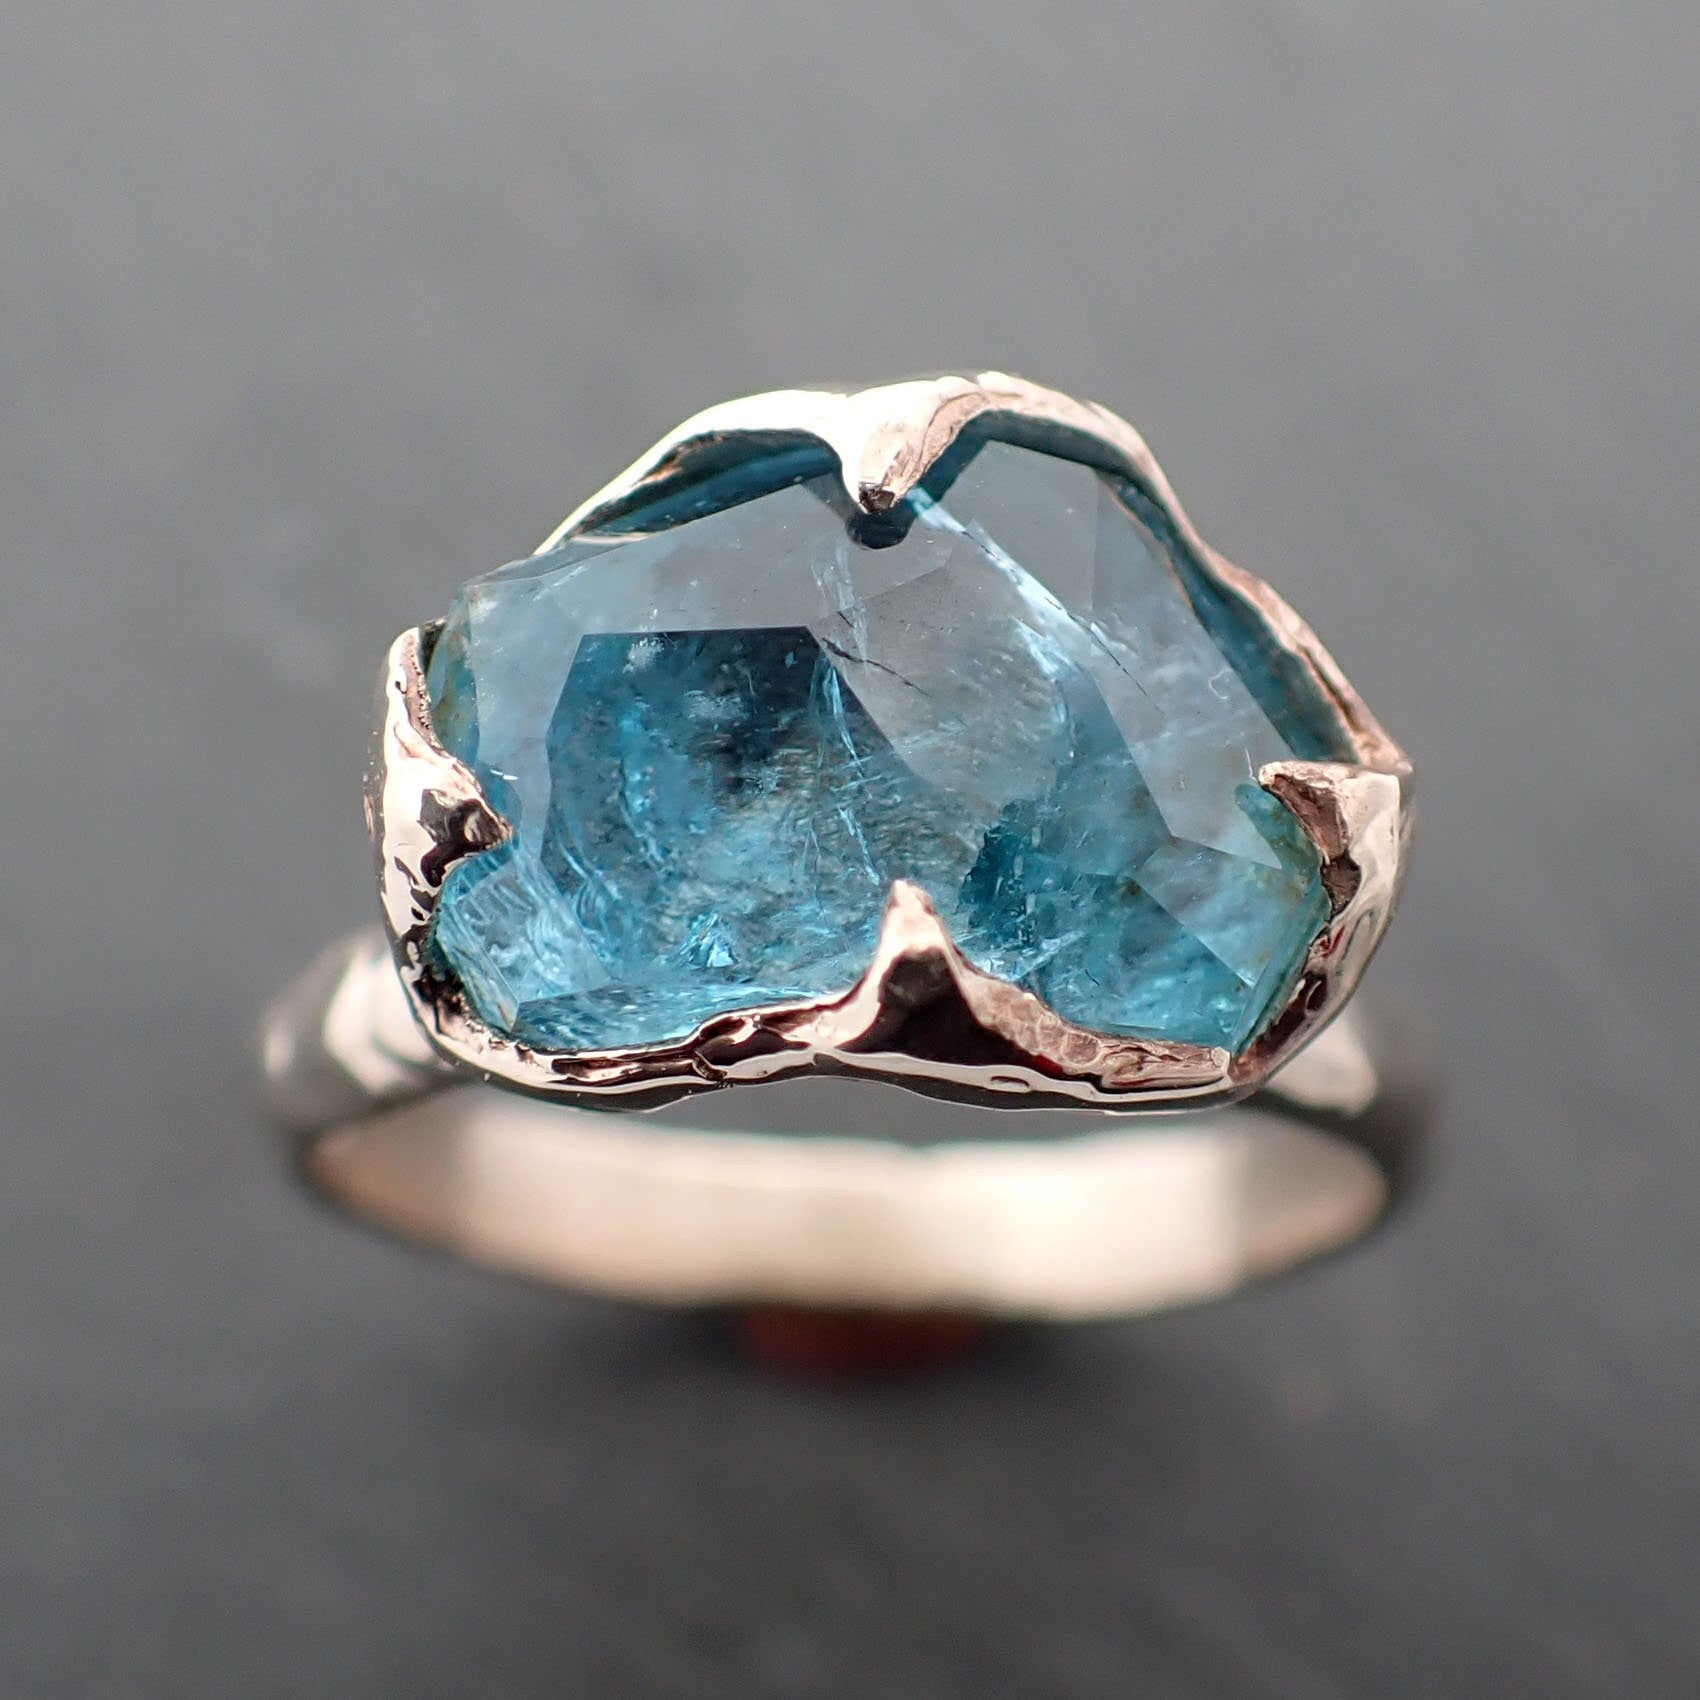 Partially faceted Aquamarine Solitaire Ring 18k gold Custom One Of a Kind Gemstone Ring Bespoke byAngeline 3357